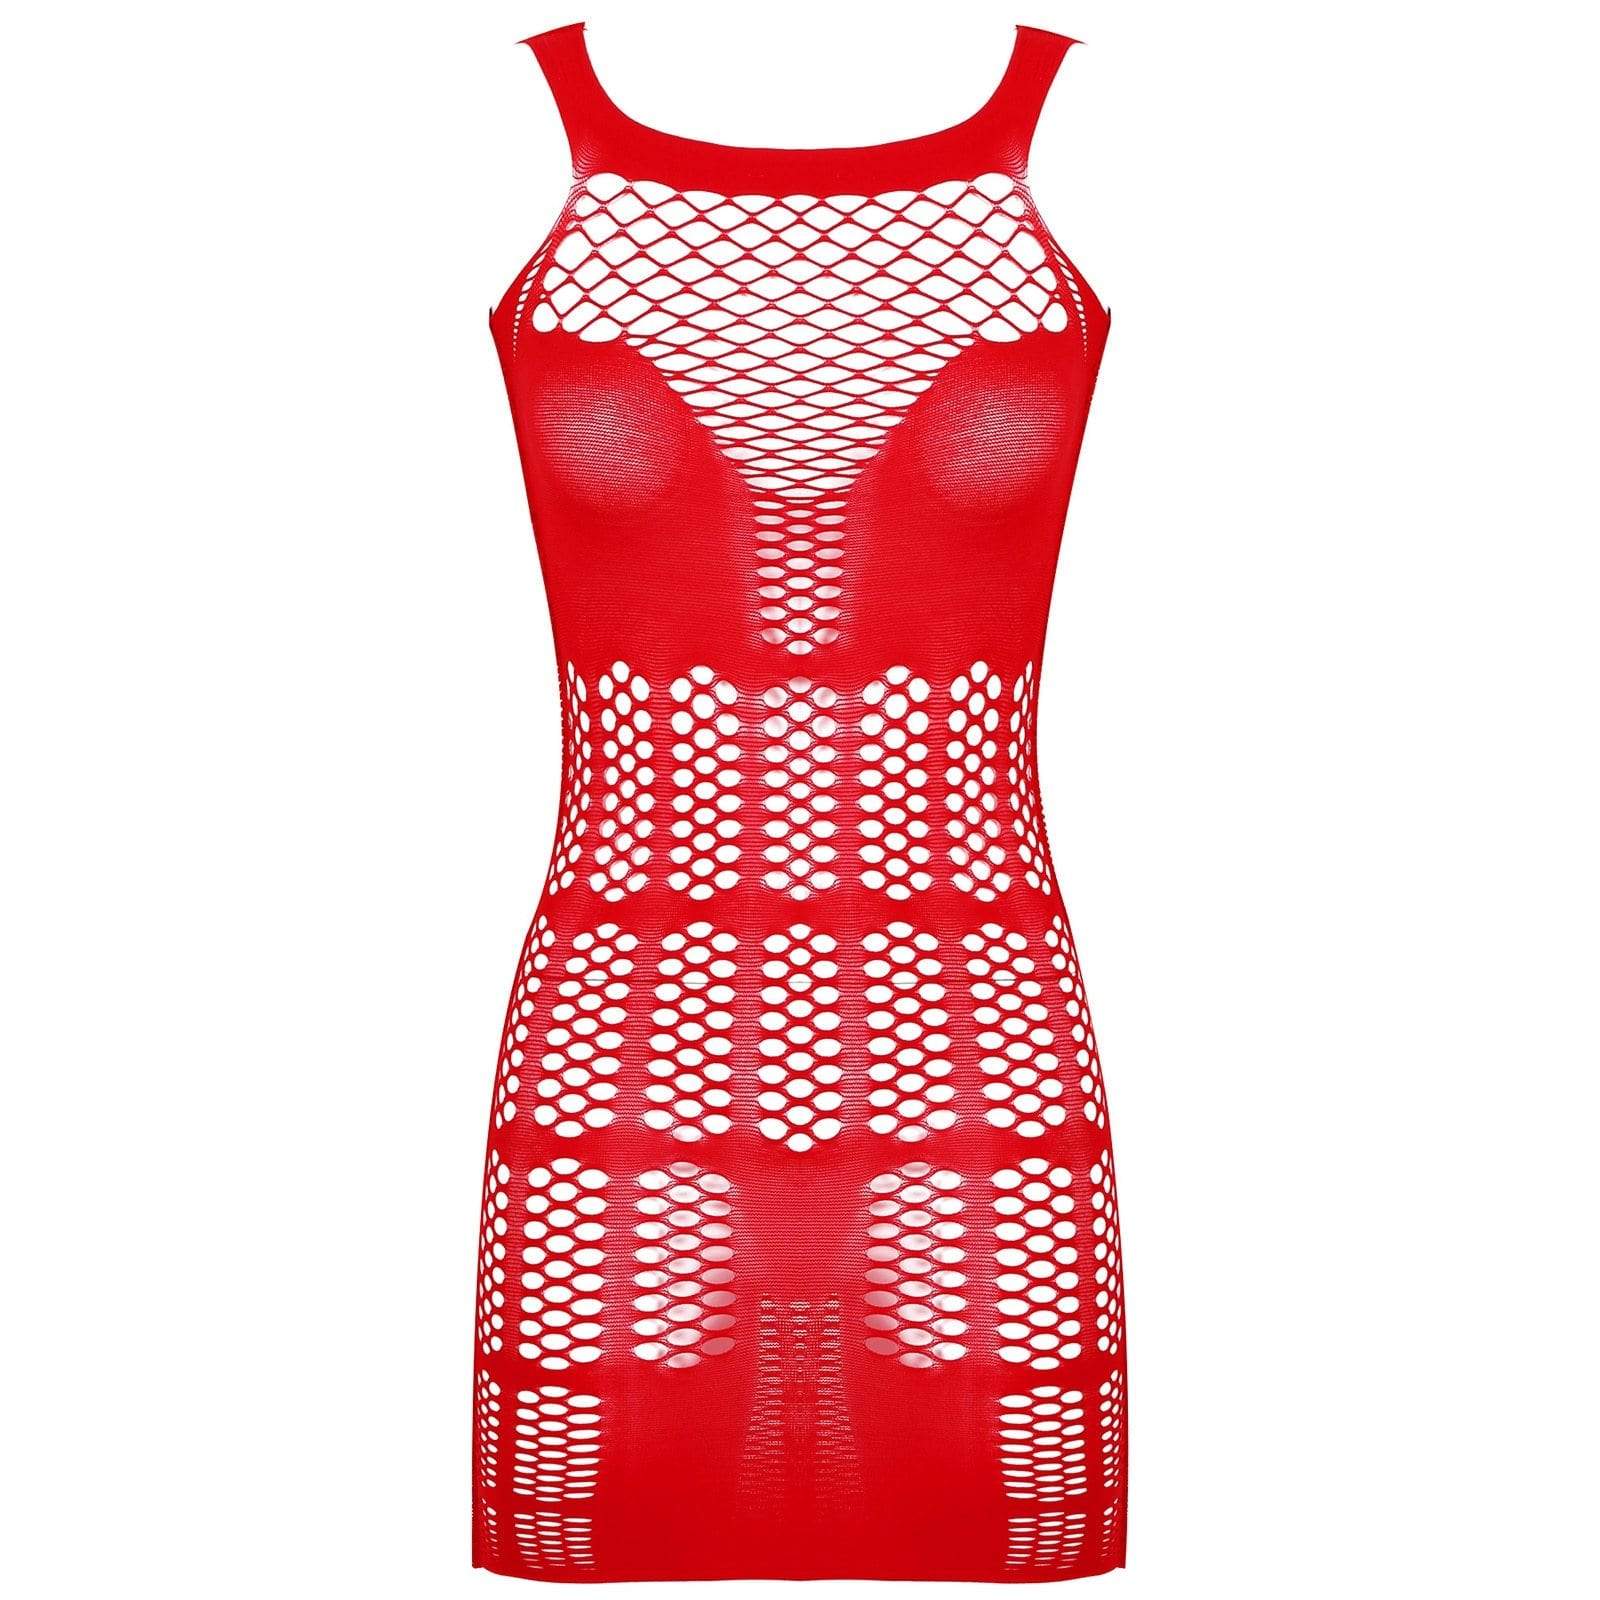 Kinky Cloth 200001895 Red / One Size Hollow Out Fishnet Mini Dress